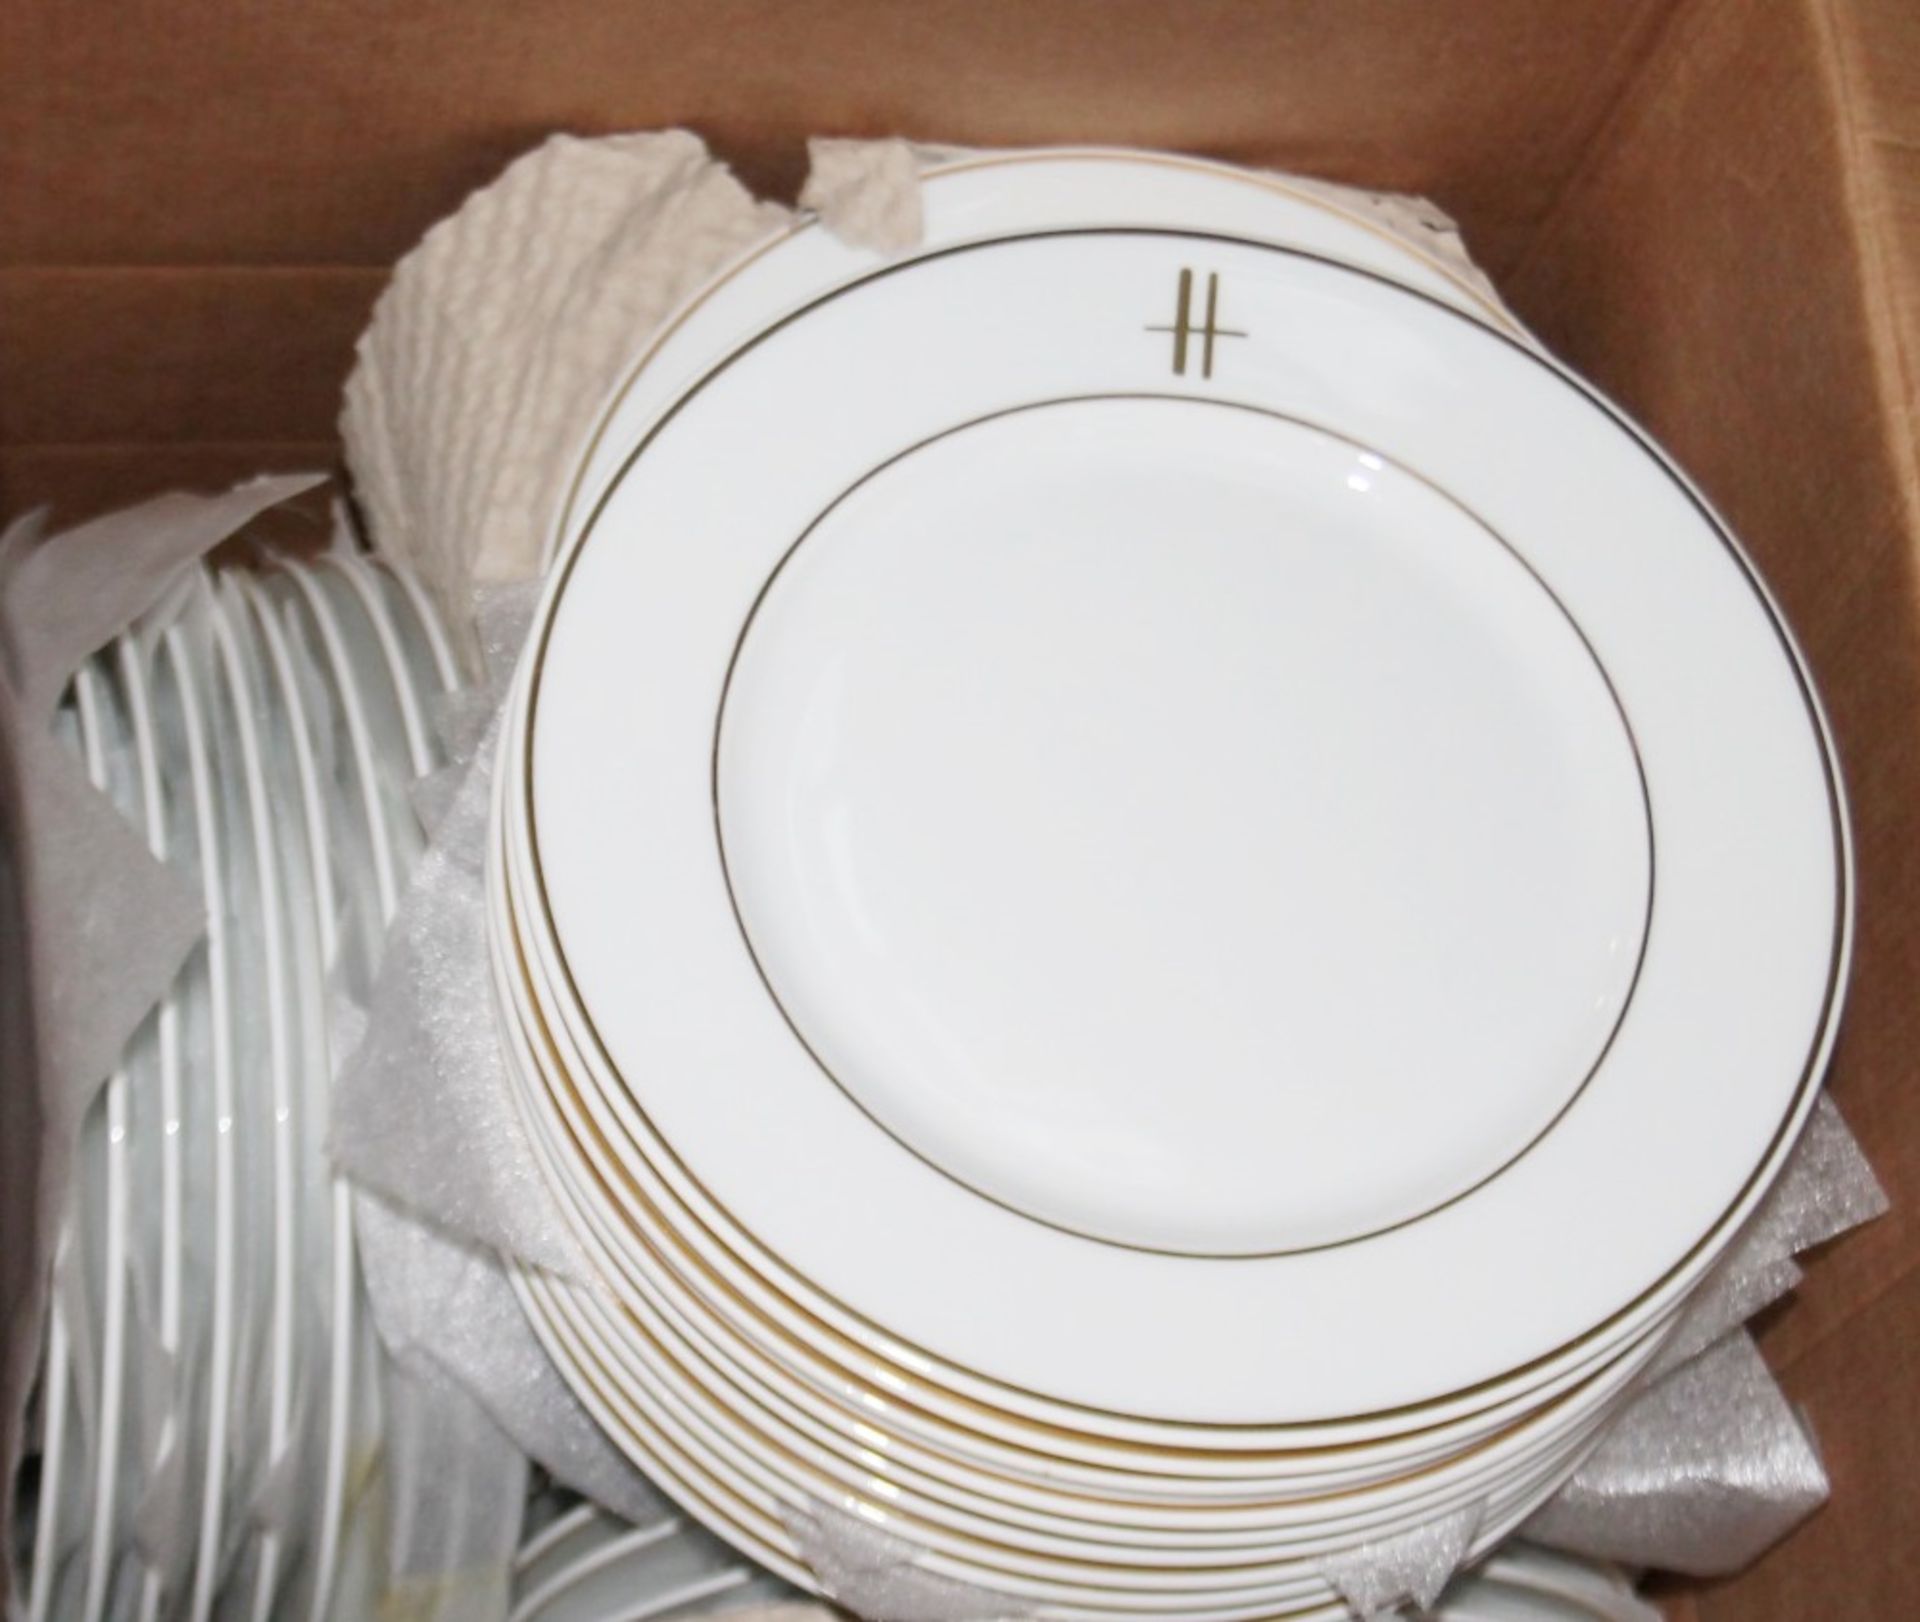 50 x PILLIVUYT Porcelain Side / Starter Plates In White Featuring 'Famous Branding' In Gold - Image 3 of 5